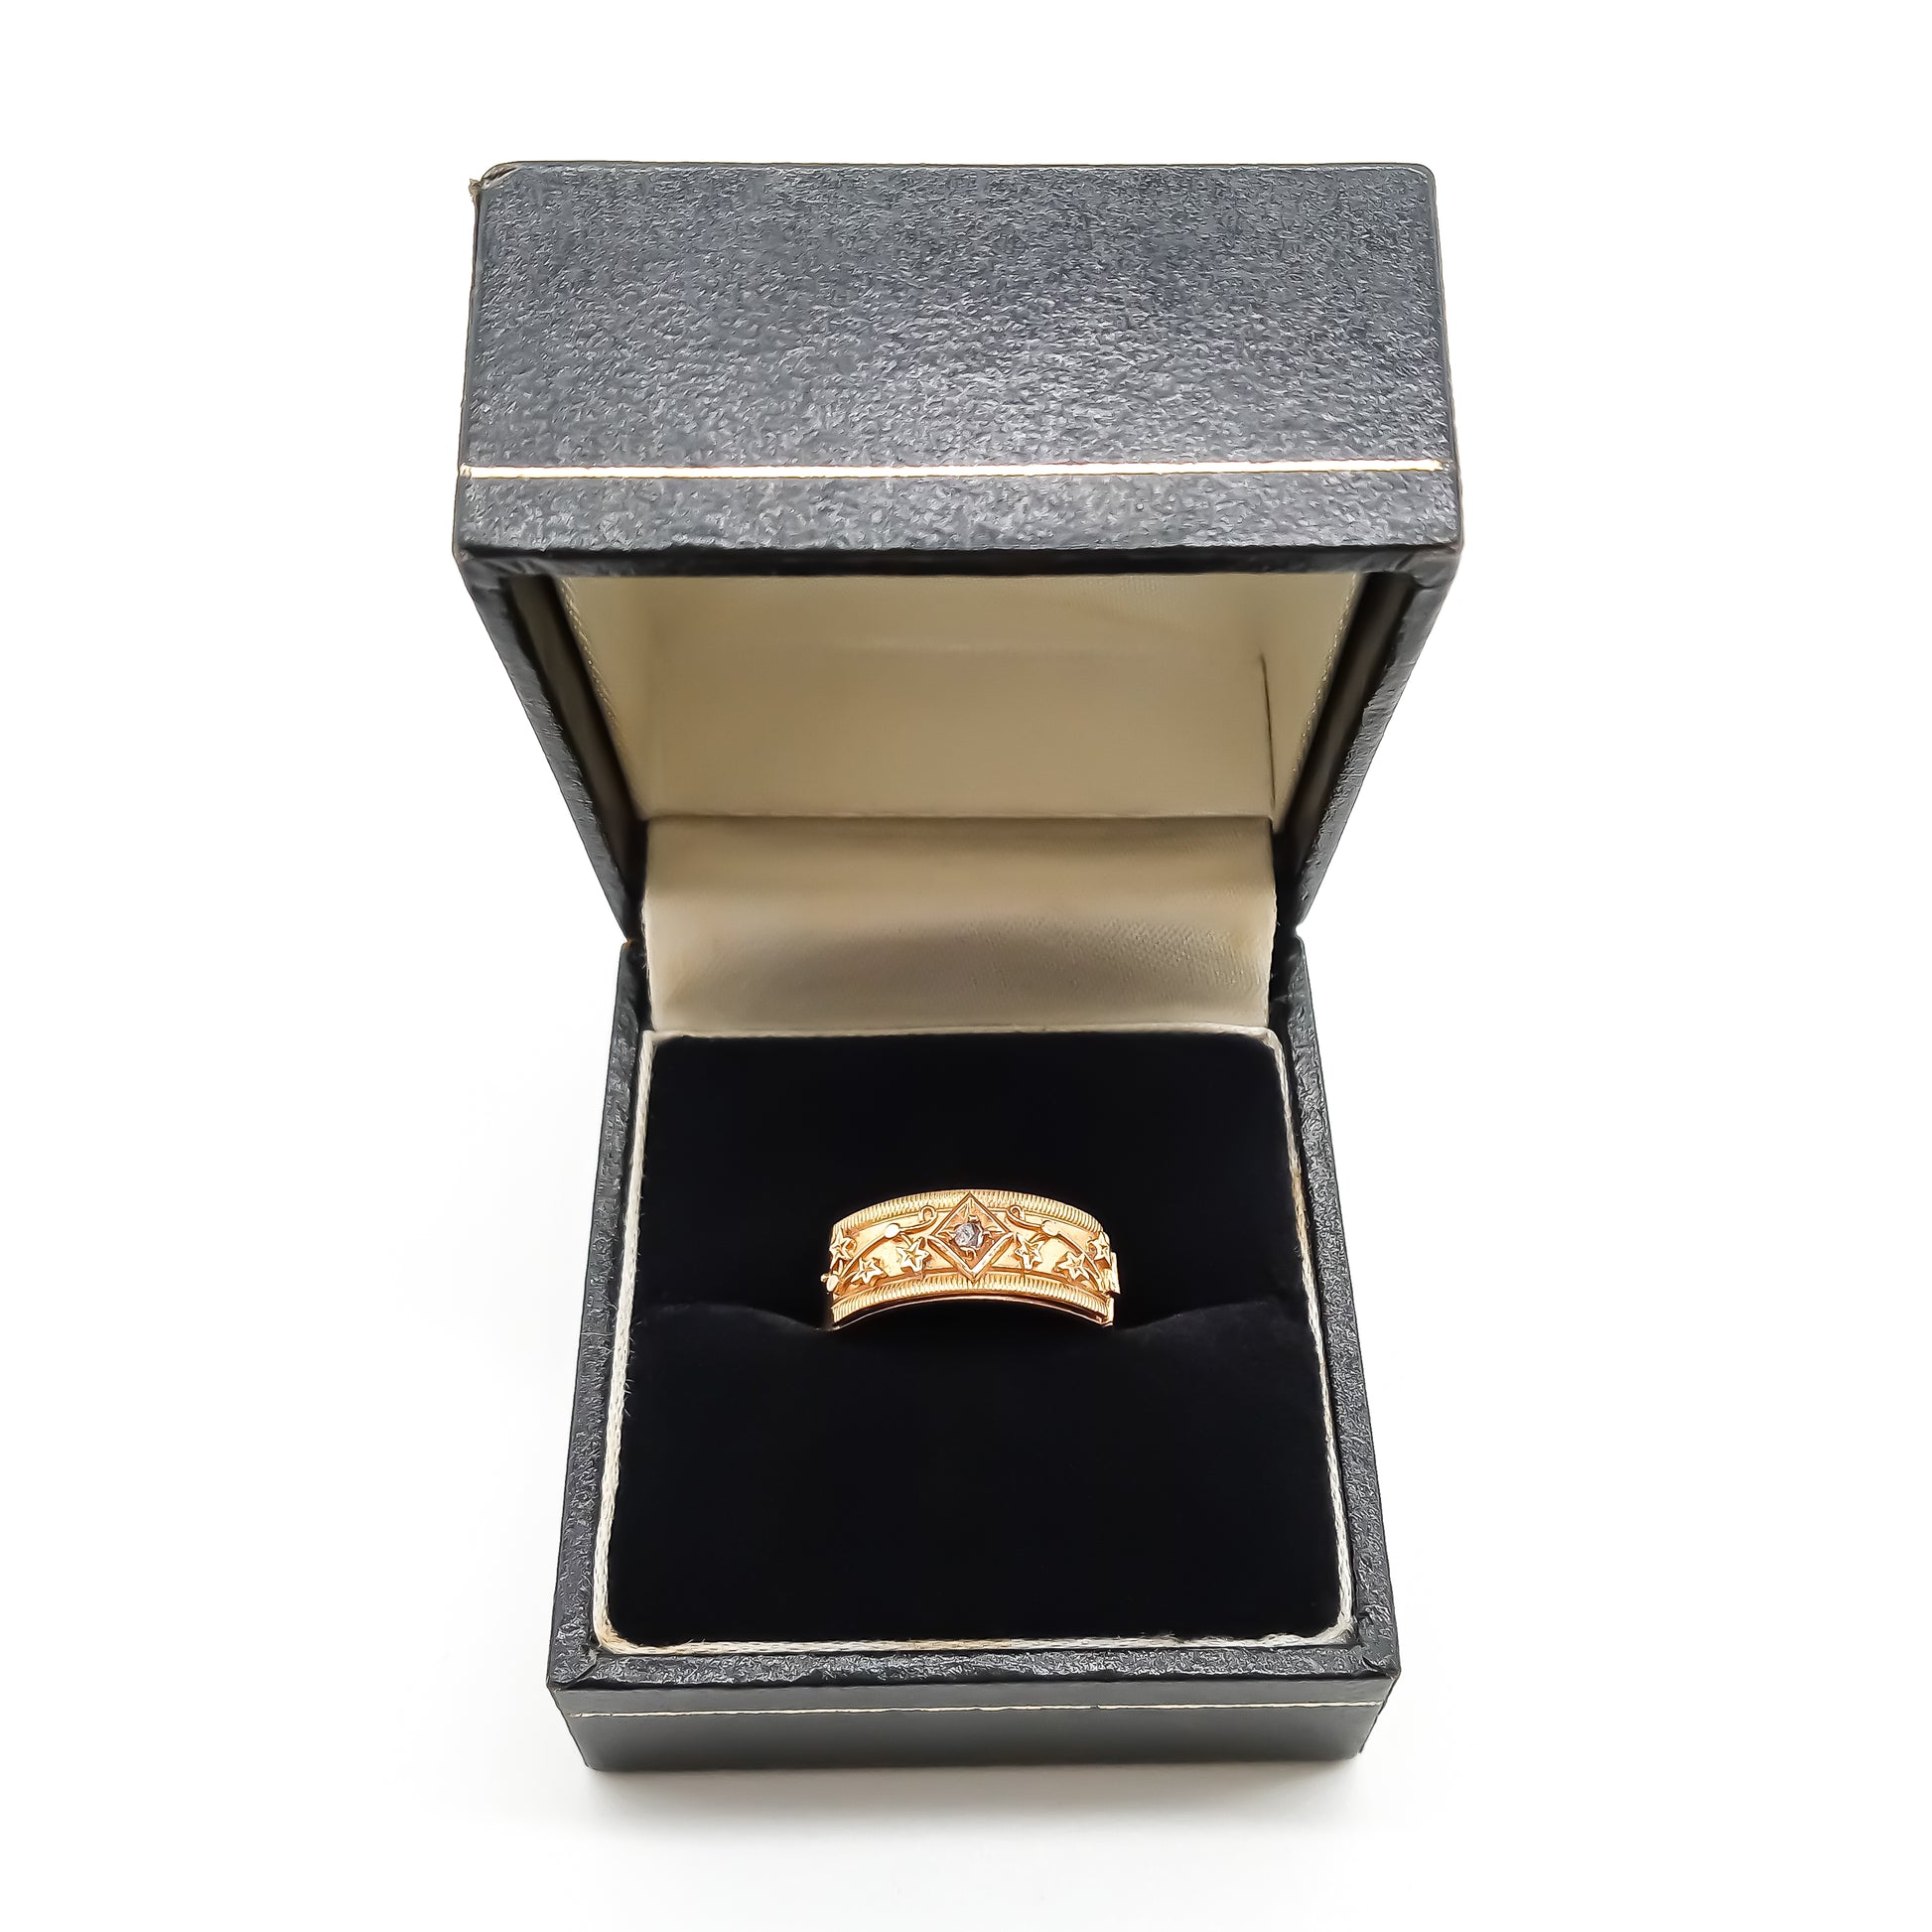 Rare 18ct gold Victorian REGARD ring set with a small mine-cut diamond and delicate leaf design in a black ring box.